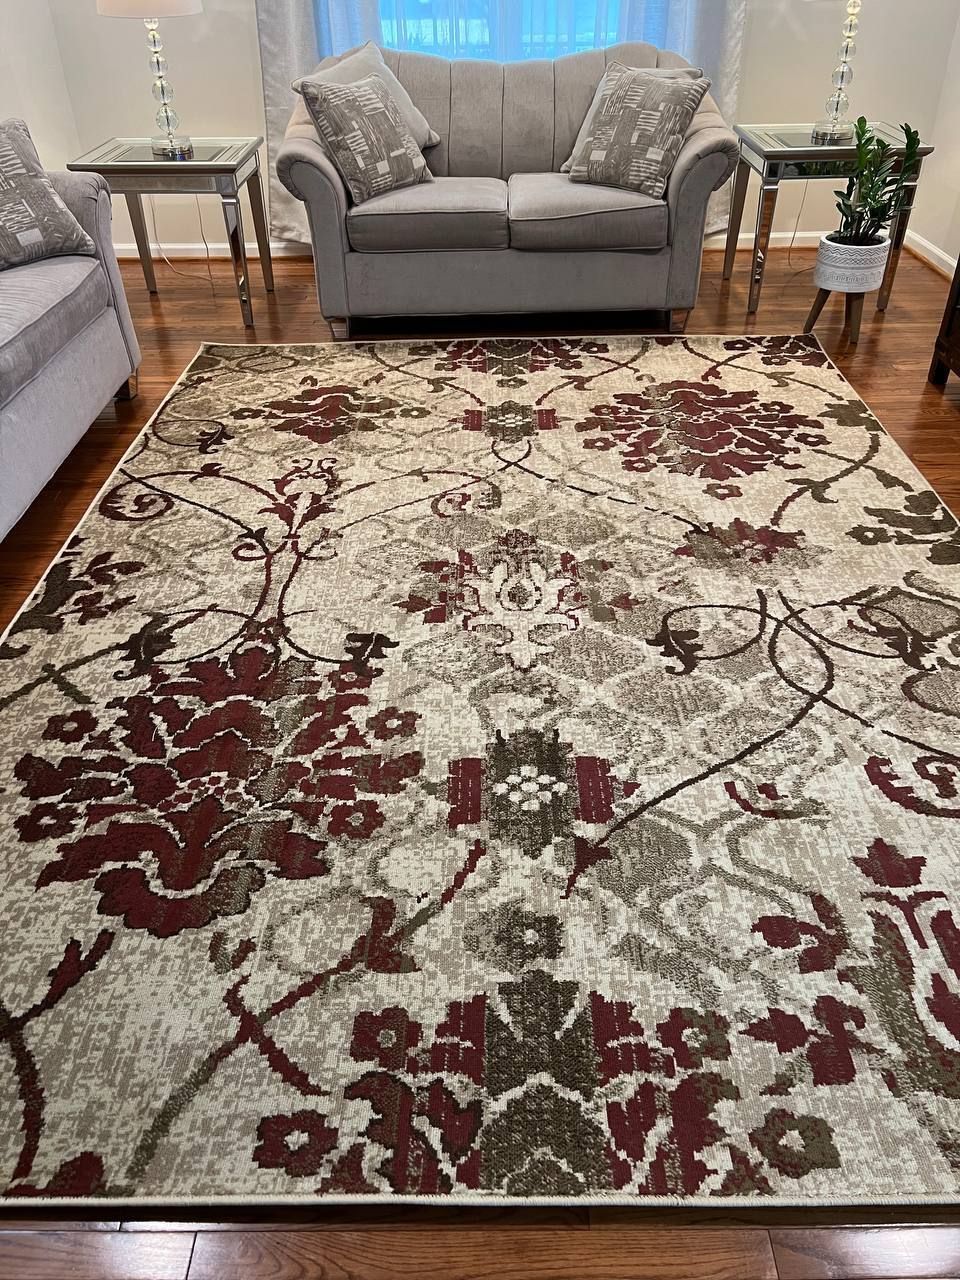 New Large Burgundy Modern Style Area Rug Floor 8x11, 5x8 Carpets | Ebay For Burgundy Rugs (View 13 of 15)